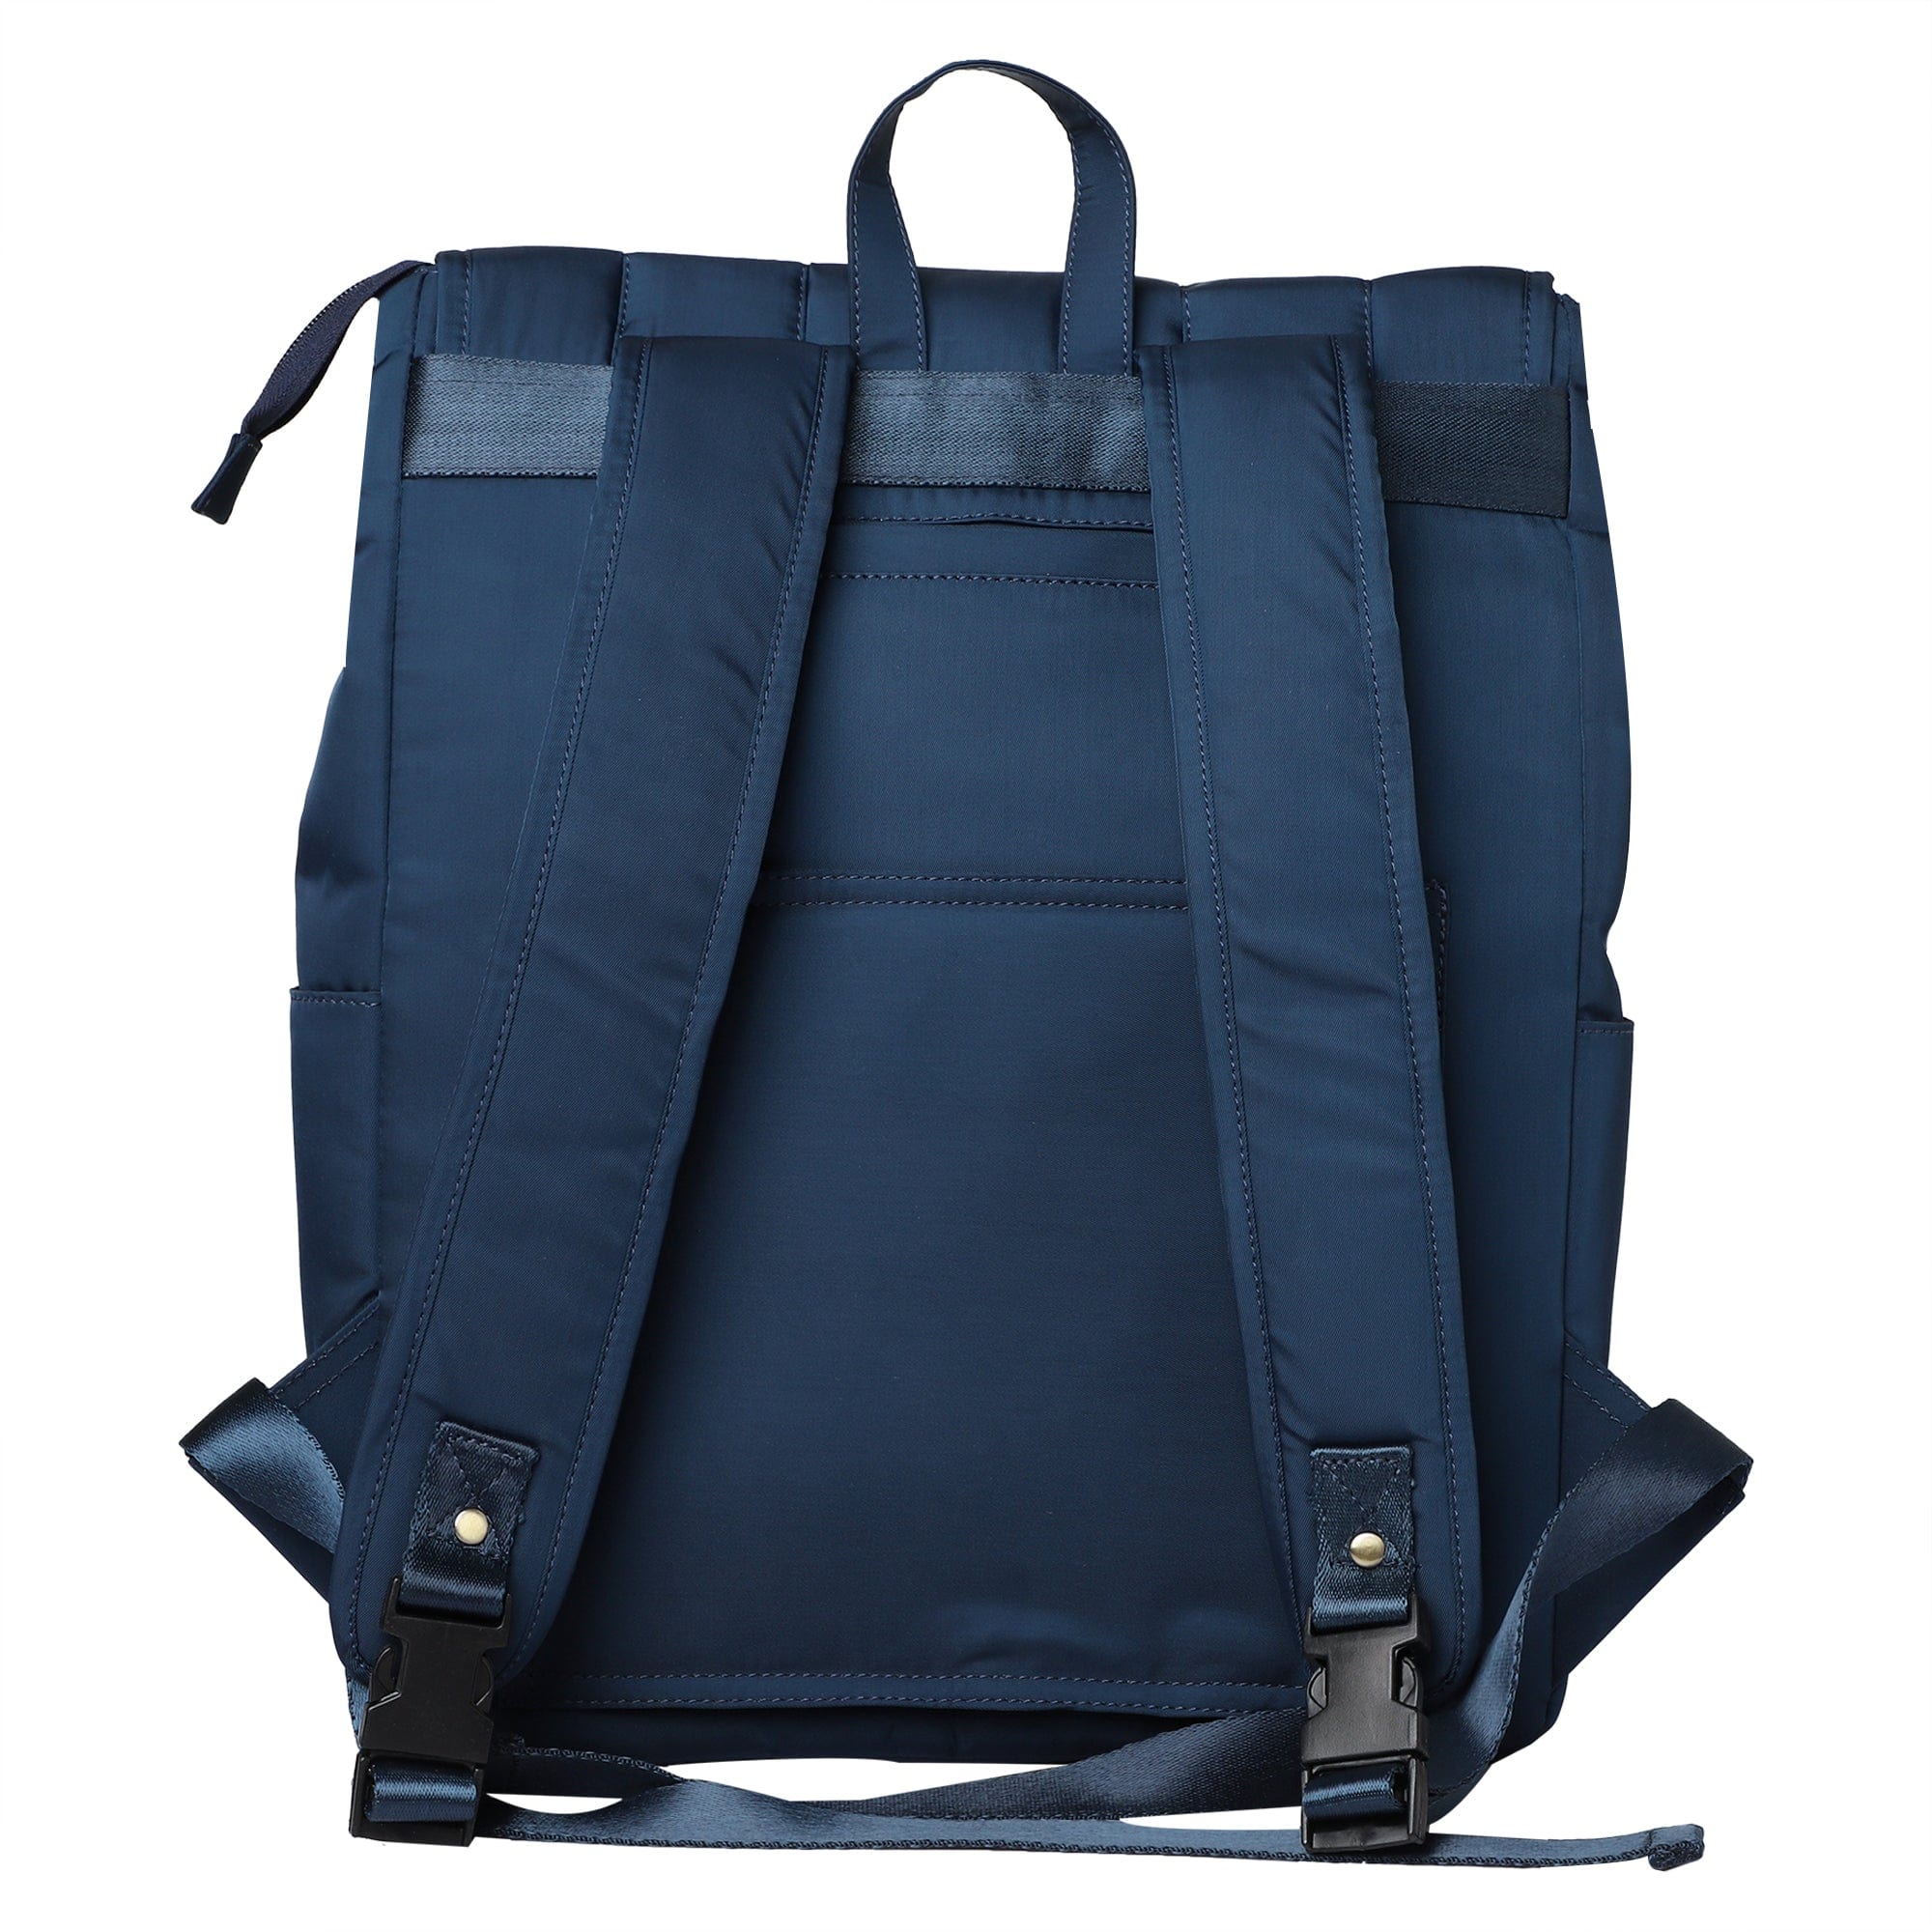 Mona B Unisex Backpack With 14 inches Laptop Compartment: Troy Navy - RP-303 NAV - Backpack by Mona-B - Backpack, Flash Sale, INT_Backpack, New Arrivals, Sale